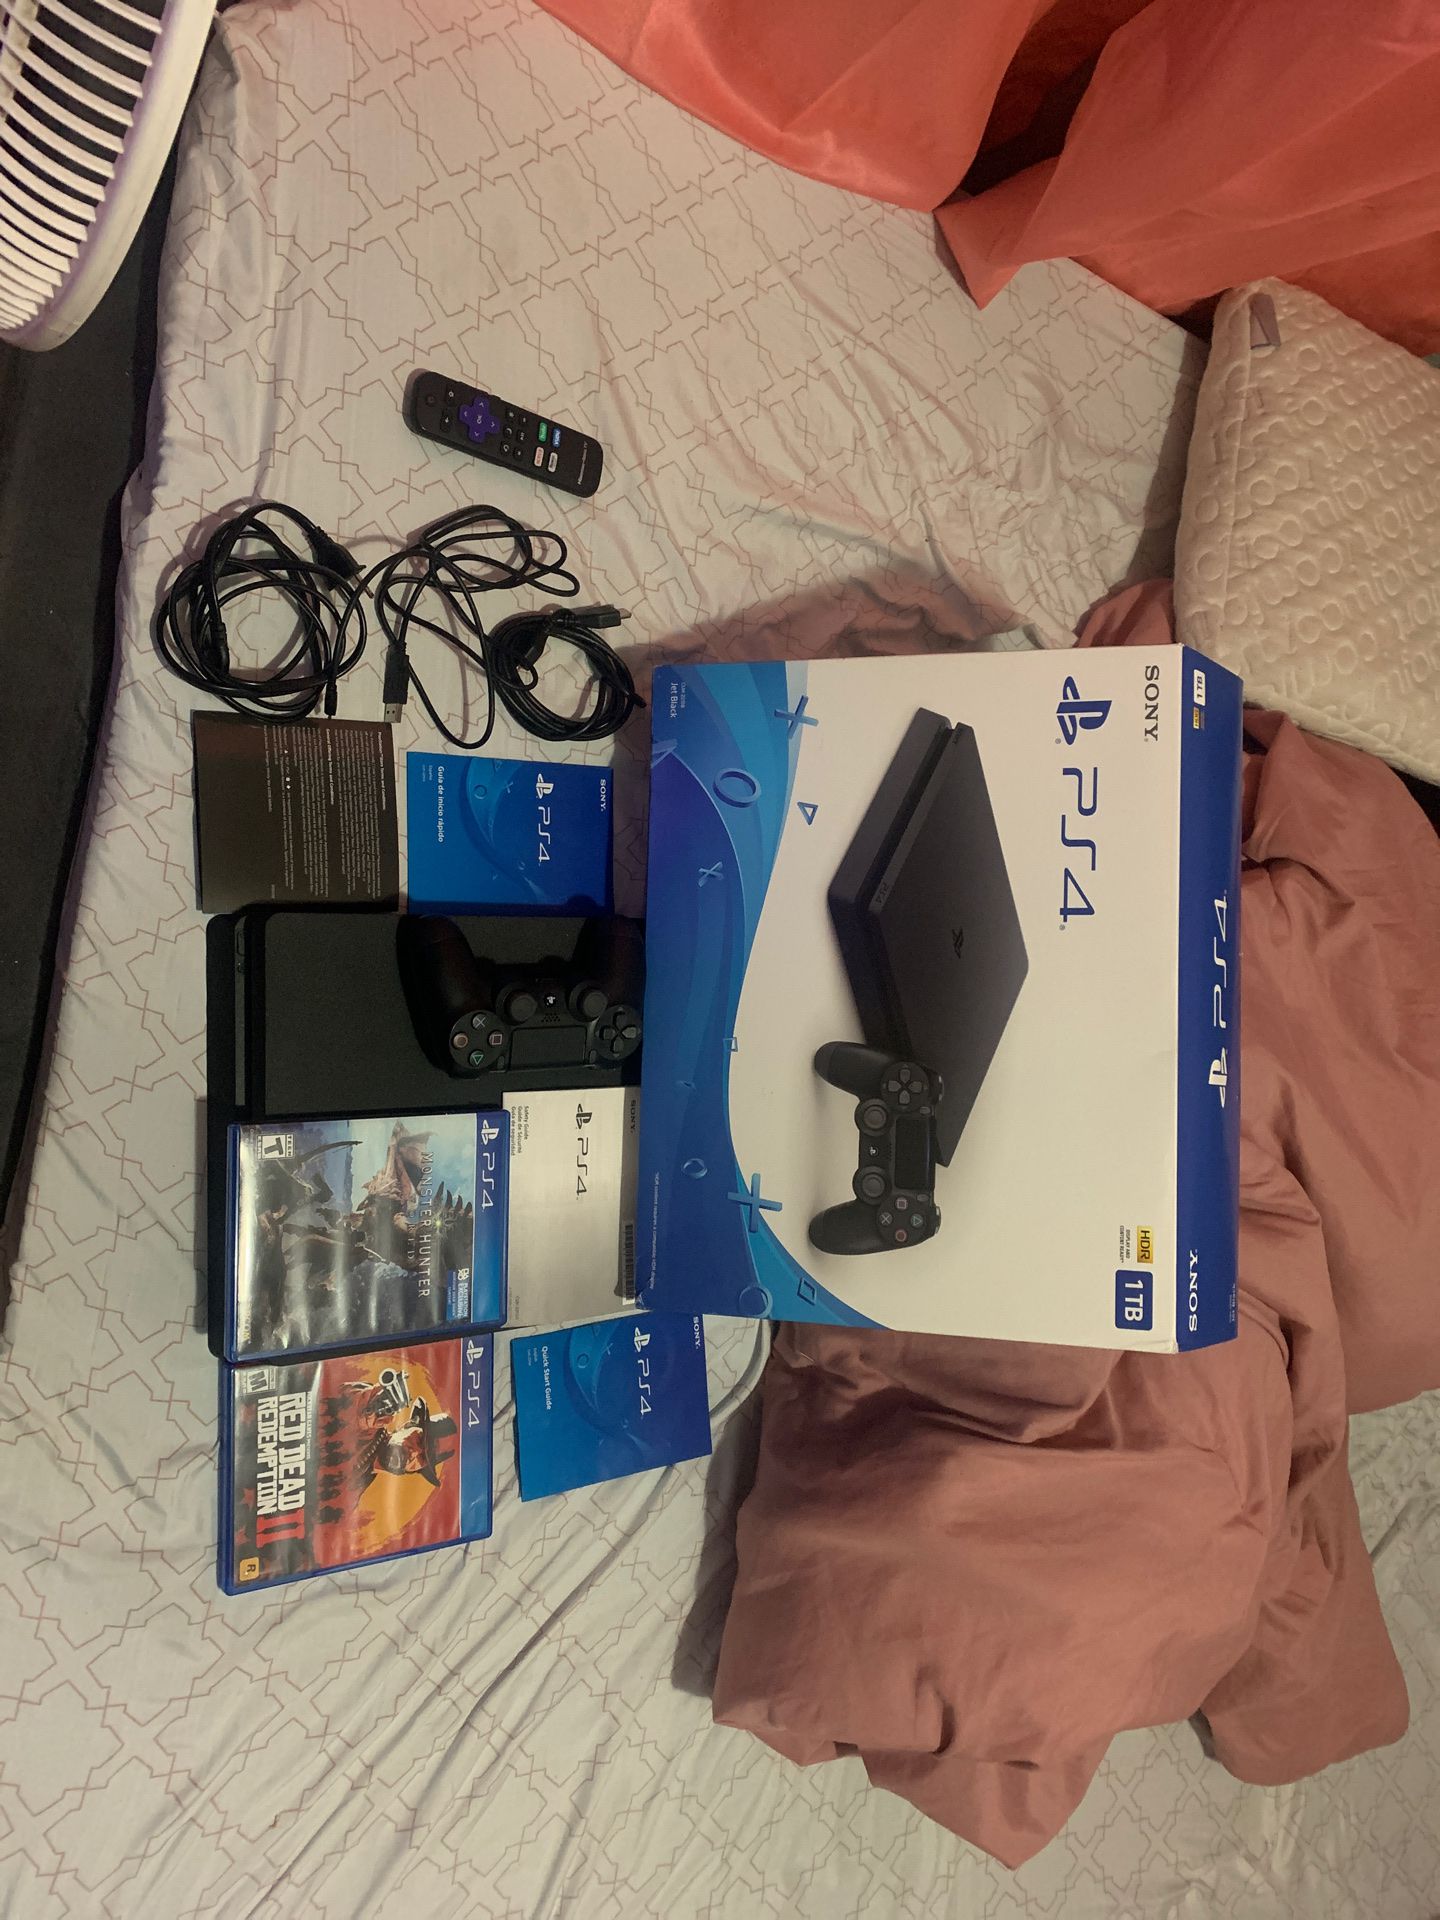 Ps4 slim 1tb ☺️ with all cords perfect condition 300$ firm don’t miss out 2 games